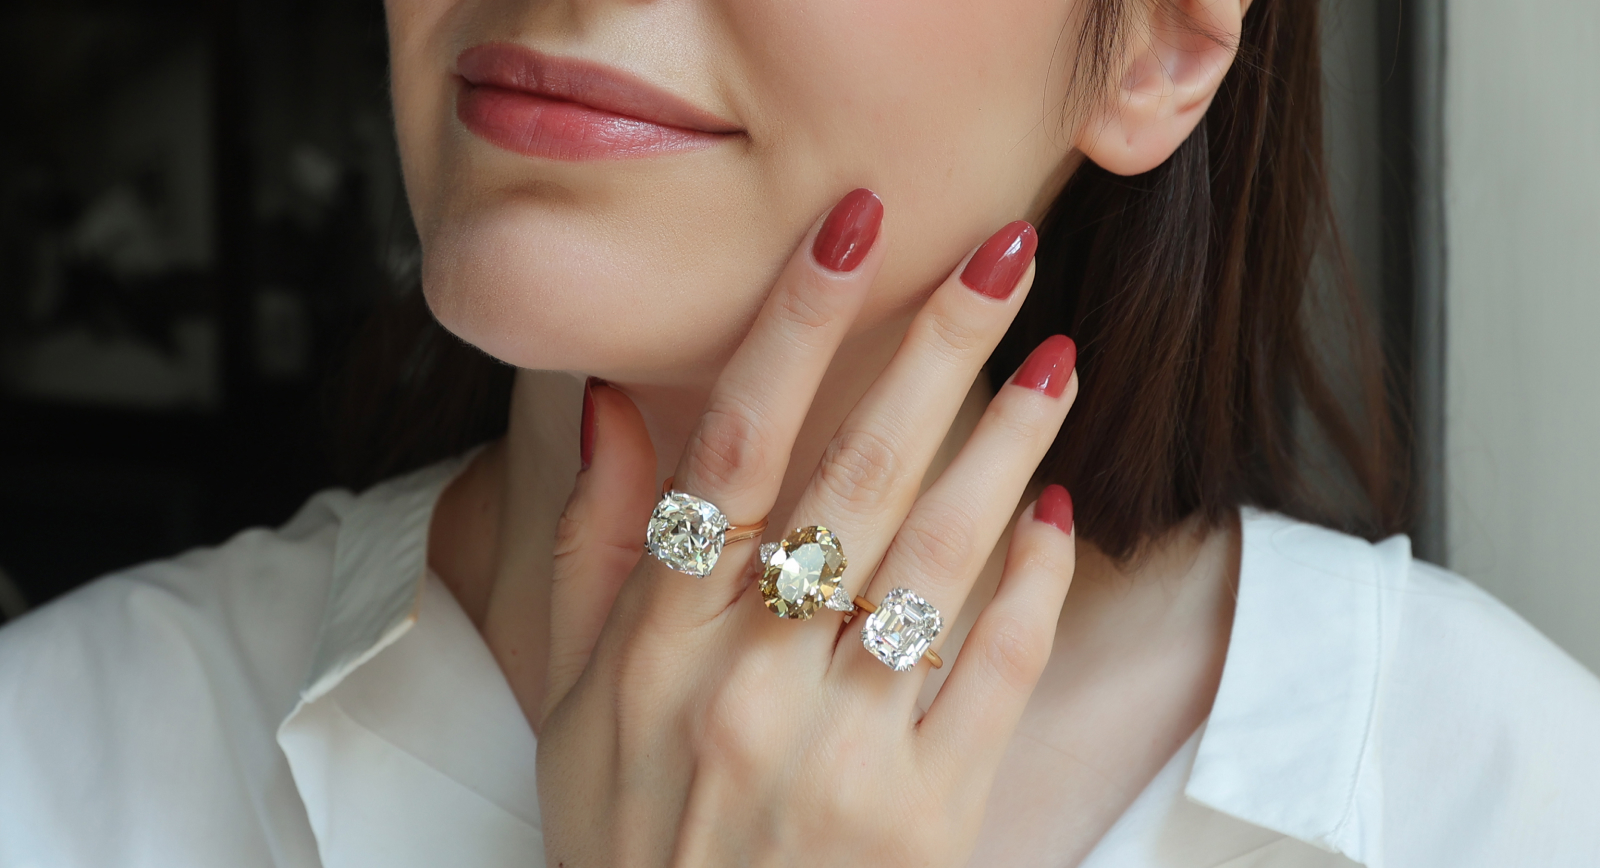 Katerina Perez wearing a selection of Antique rings at Hancocks including a 13.06-ct Old Mine Cushion-cut diamond Solitaire ring, an11.15-ct Fancy Deep colour Old-cut oval diamond ring, and a 9.01-ct Asscher-cut diamond Solitaire ring